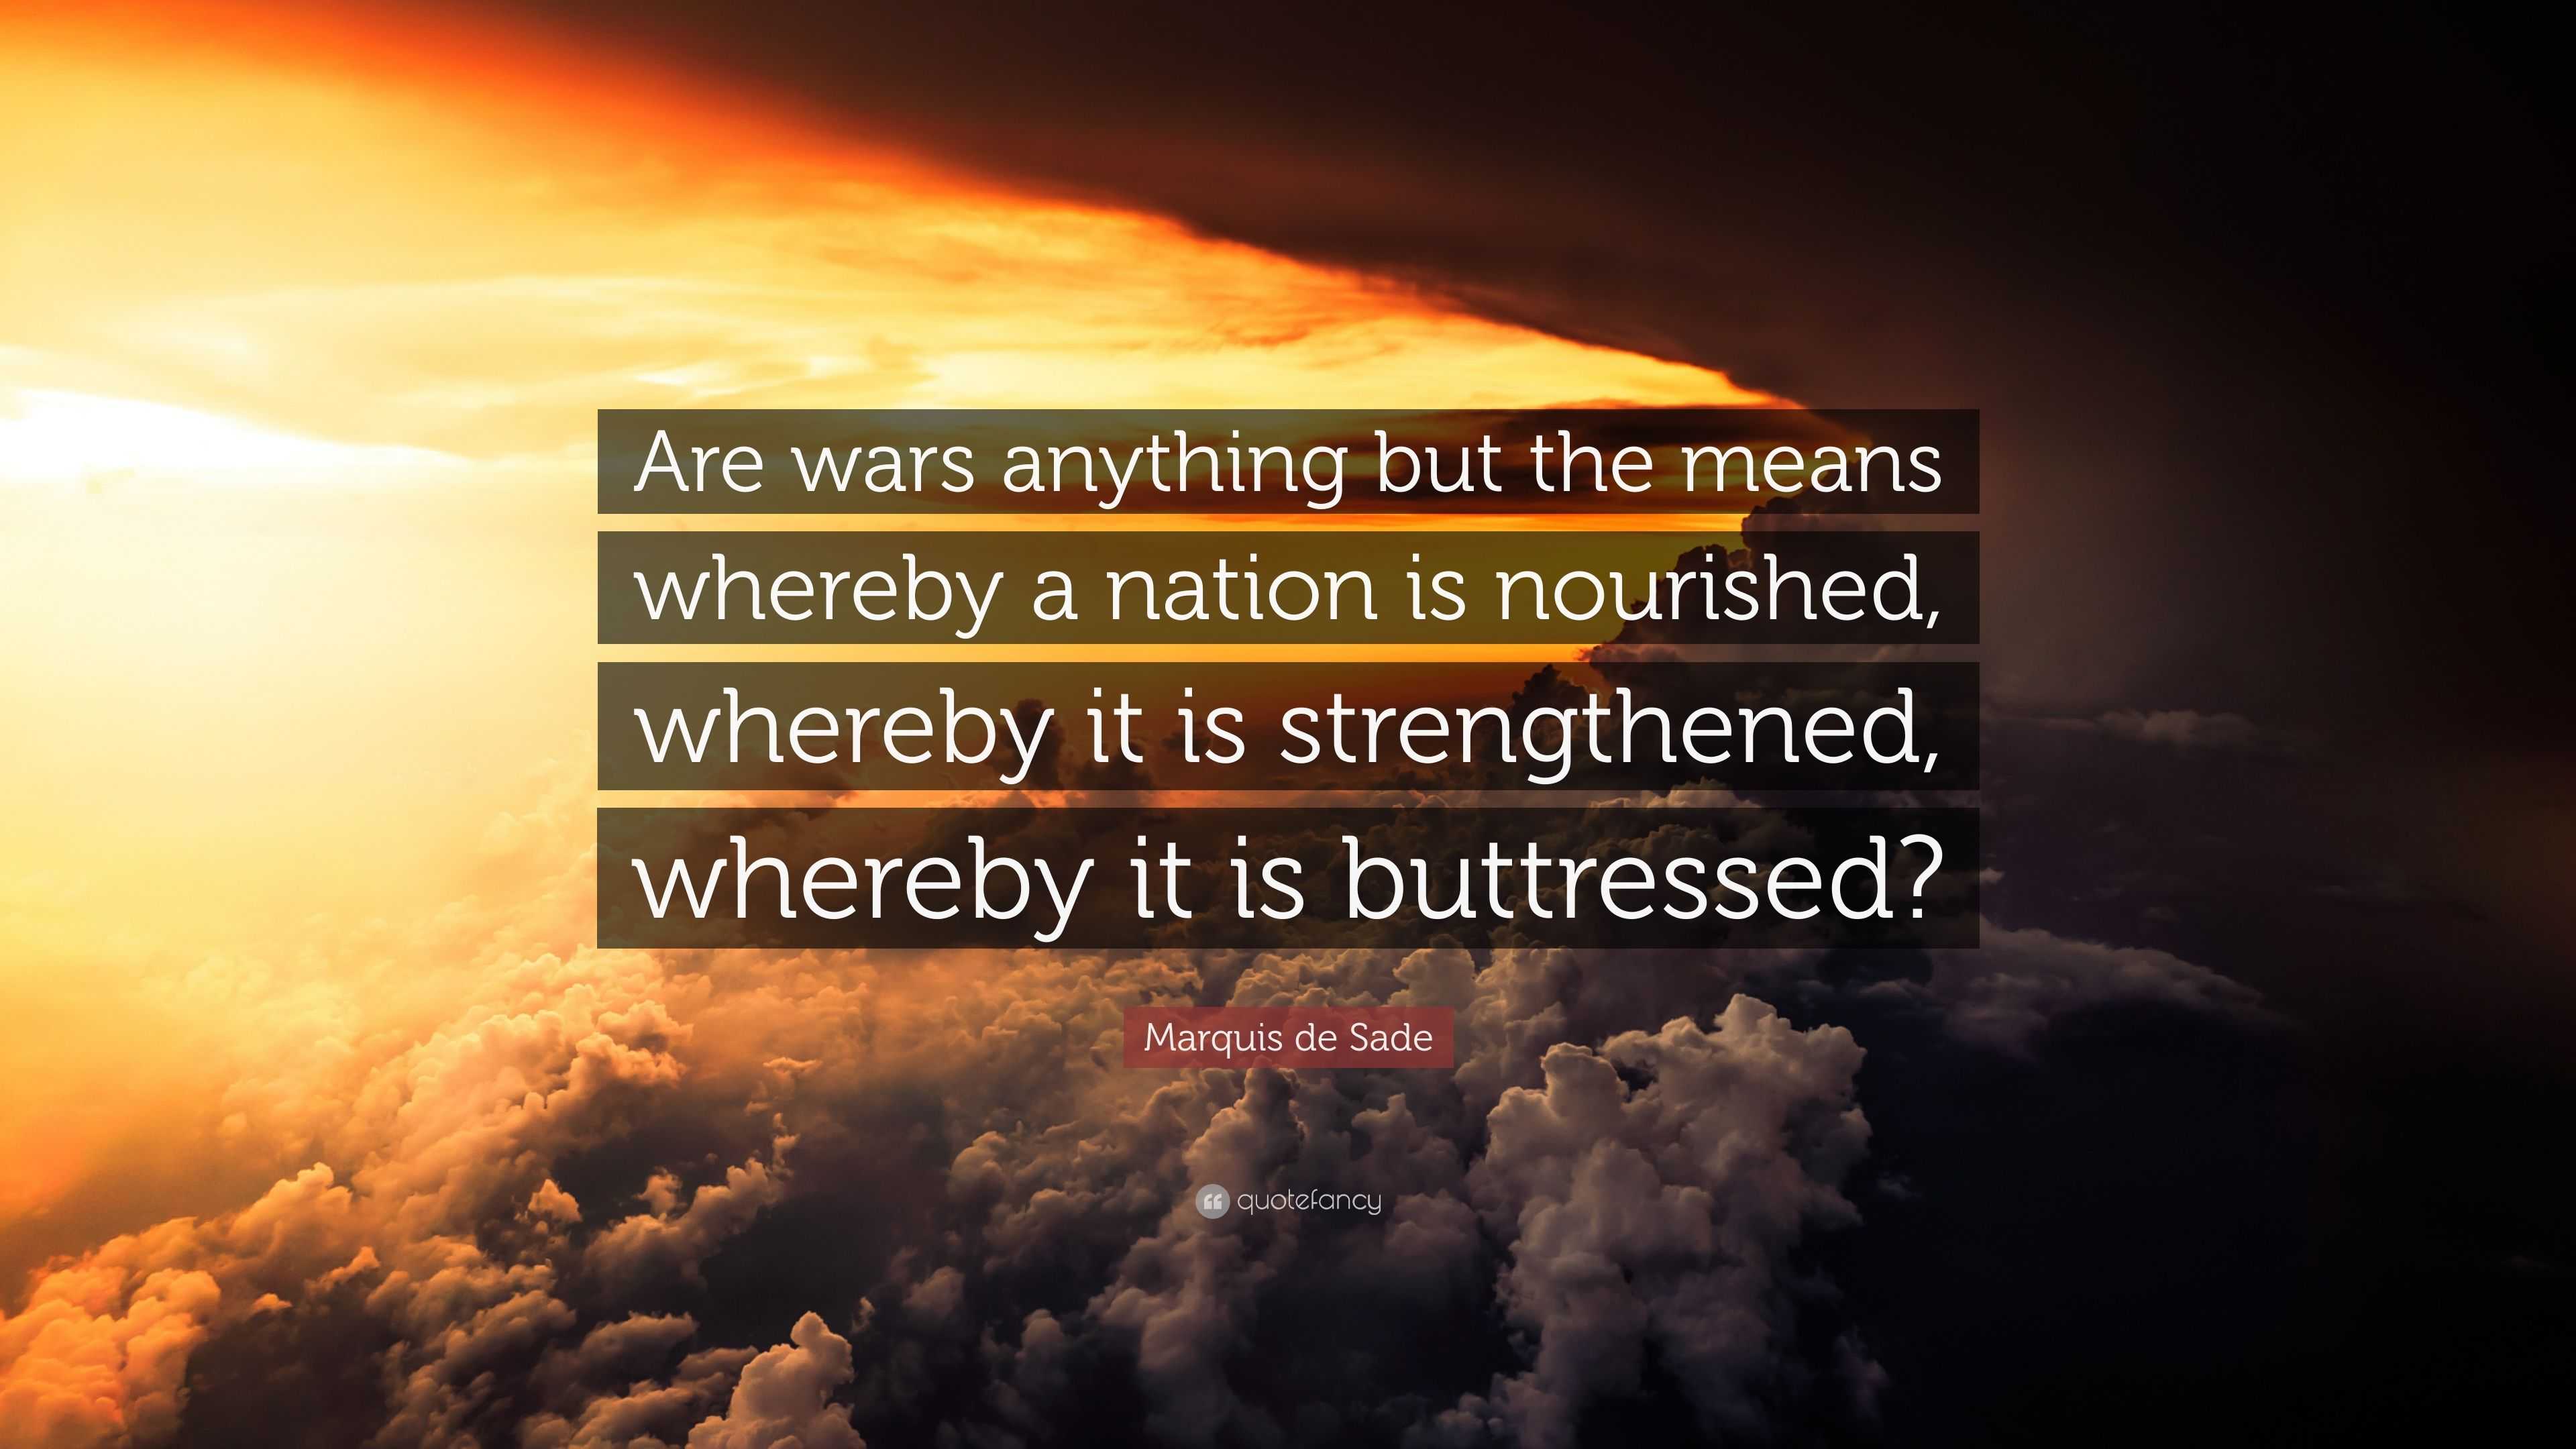 Marquis de Sade Quote: “Are wars anything but the means ...